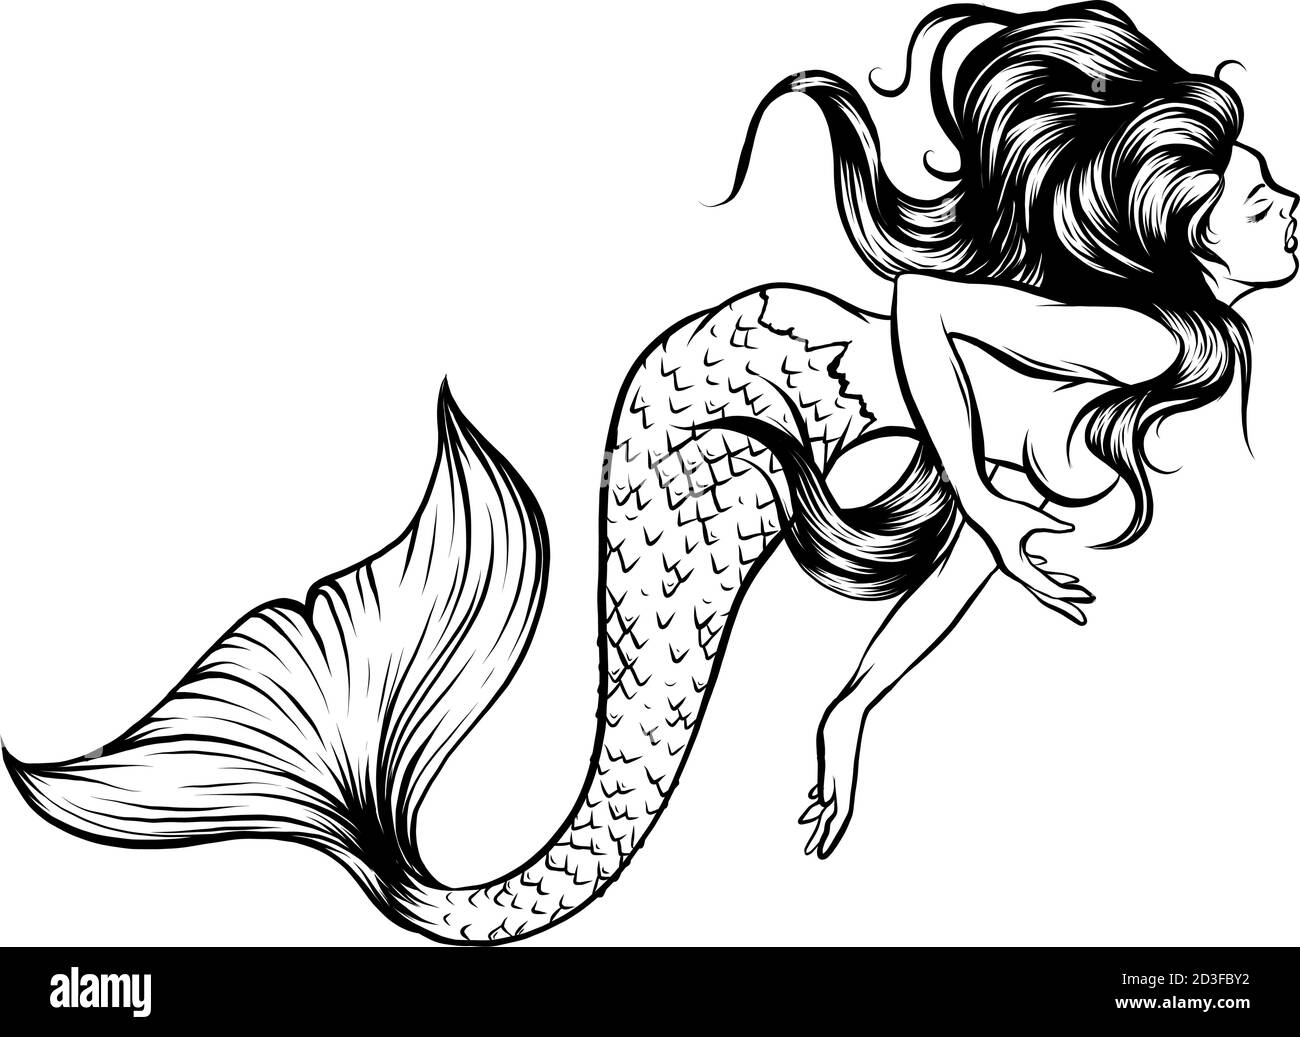 Siren tail Stock Vector Images - Alamy